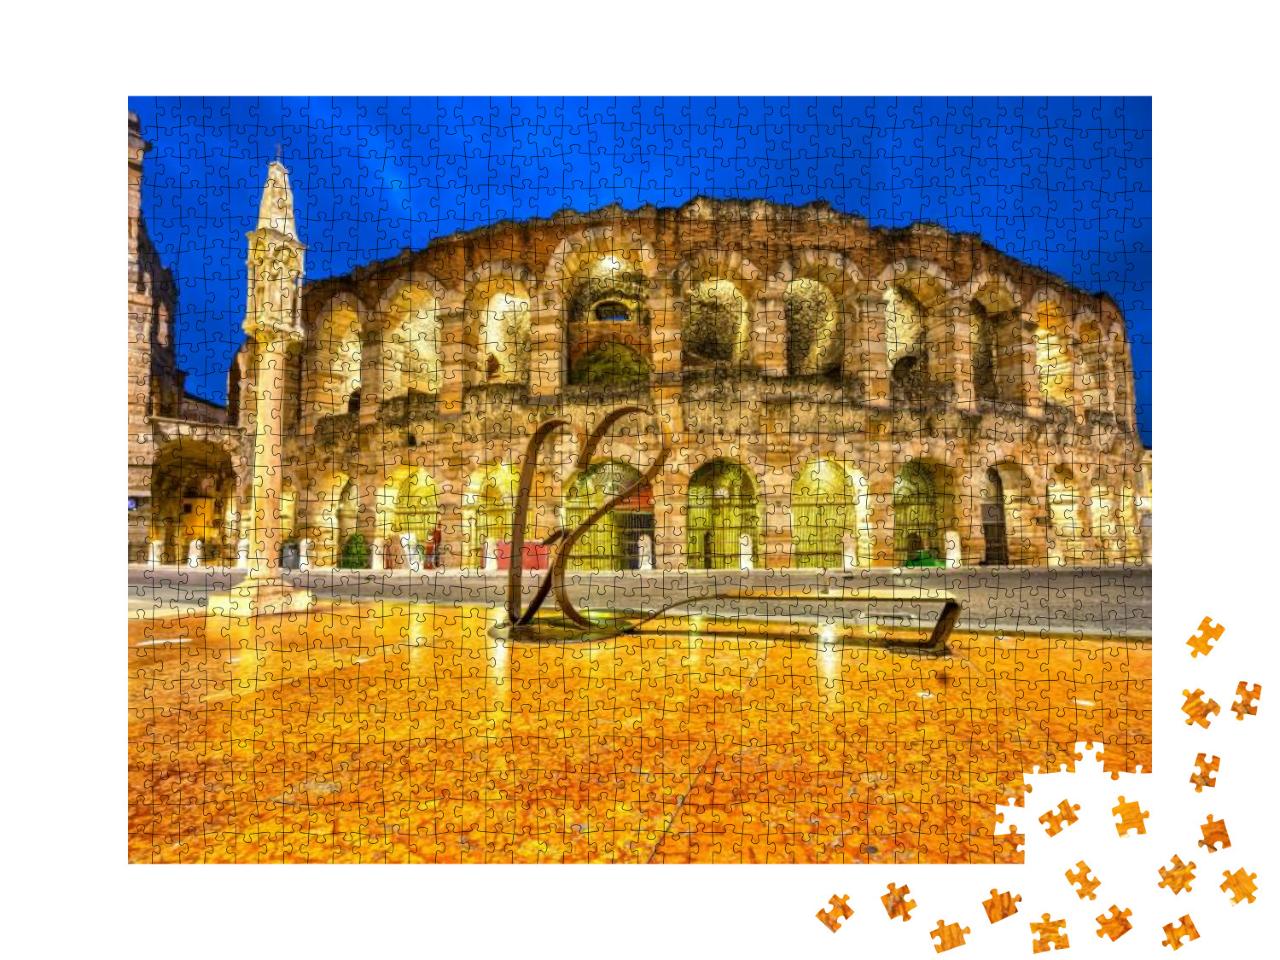 Verona, Italy. Night Picture of the Famous Arena... Jigsaw Puzzle with 1000 pieces